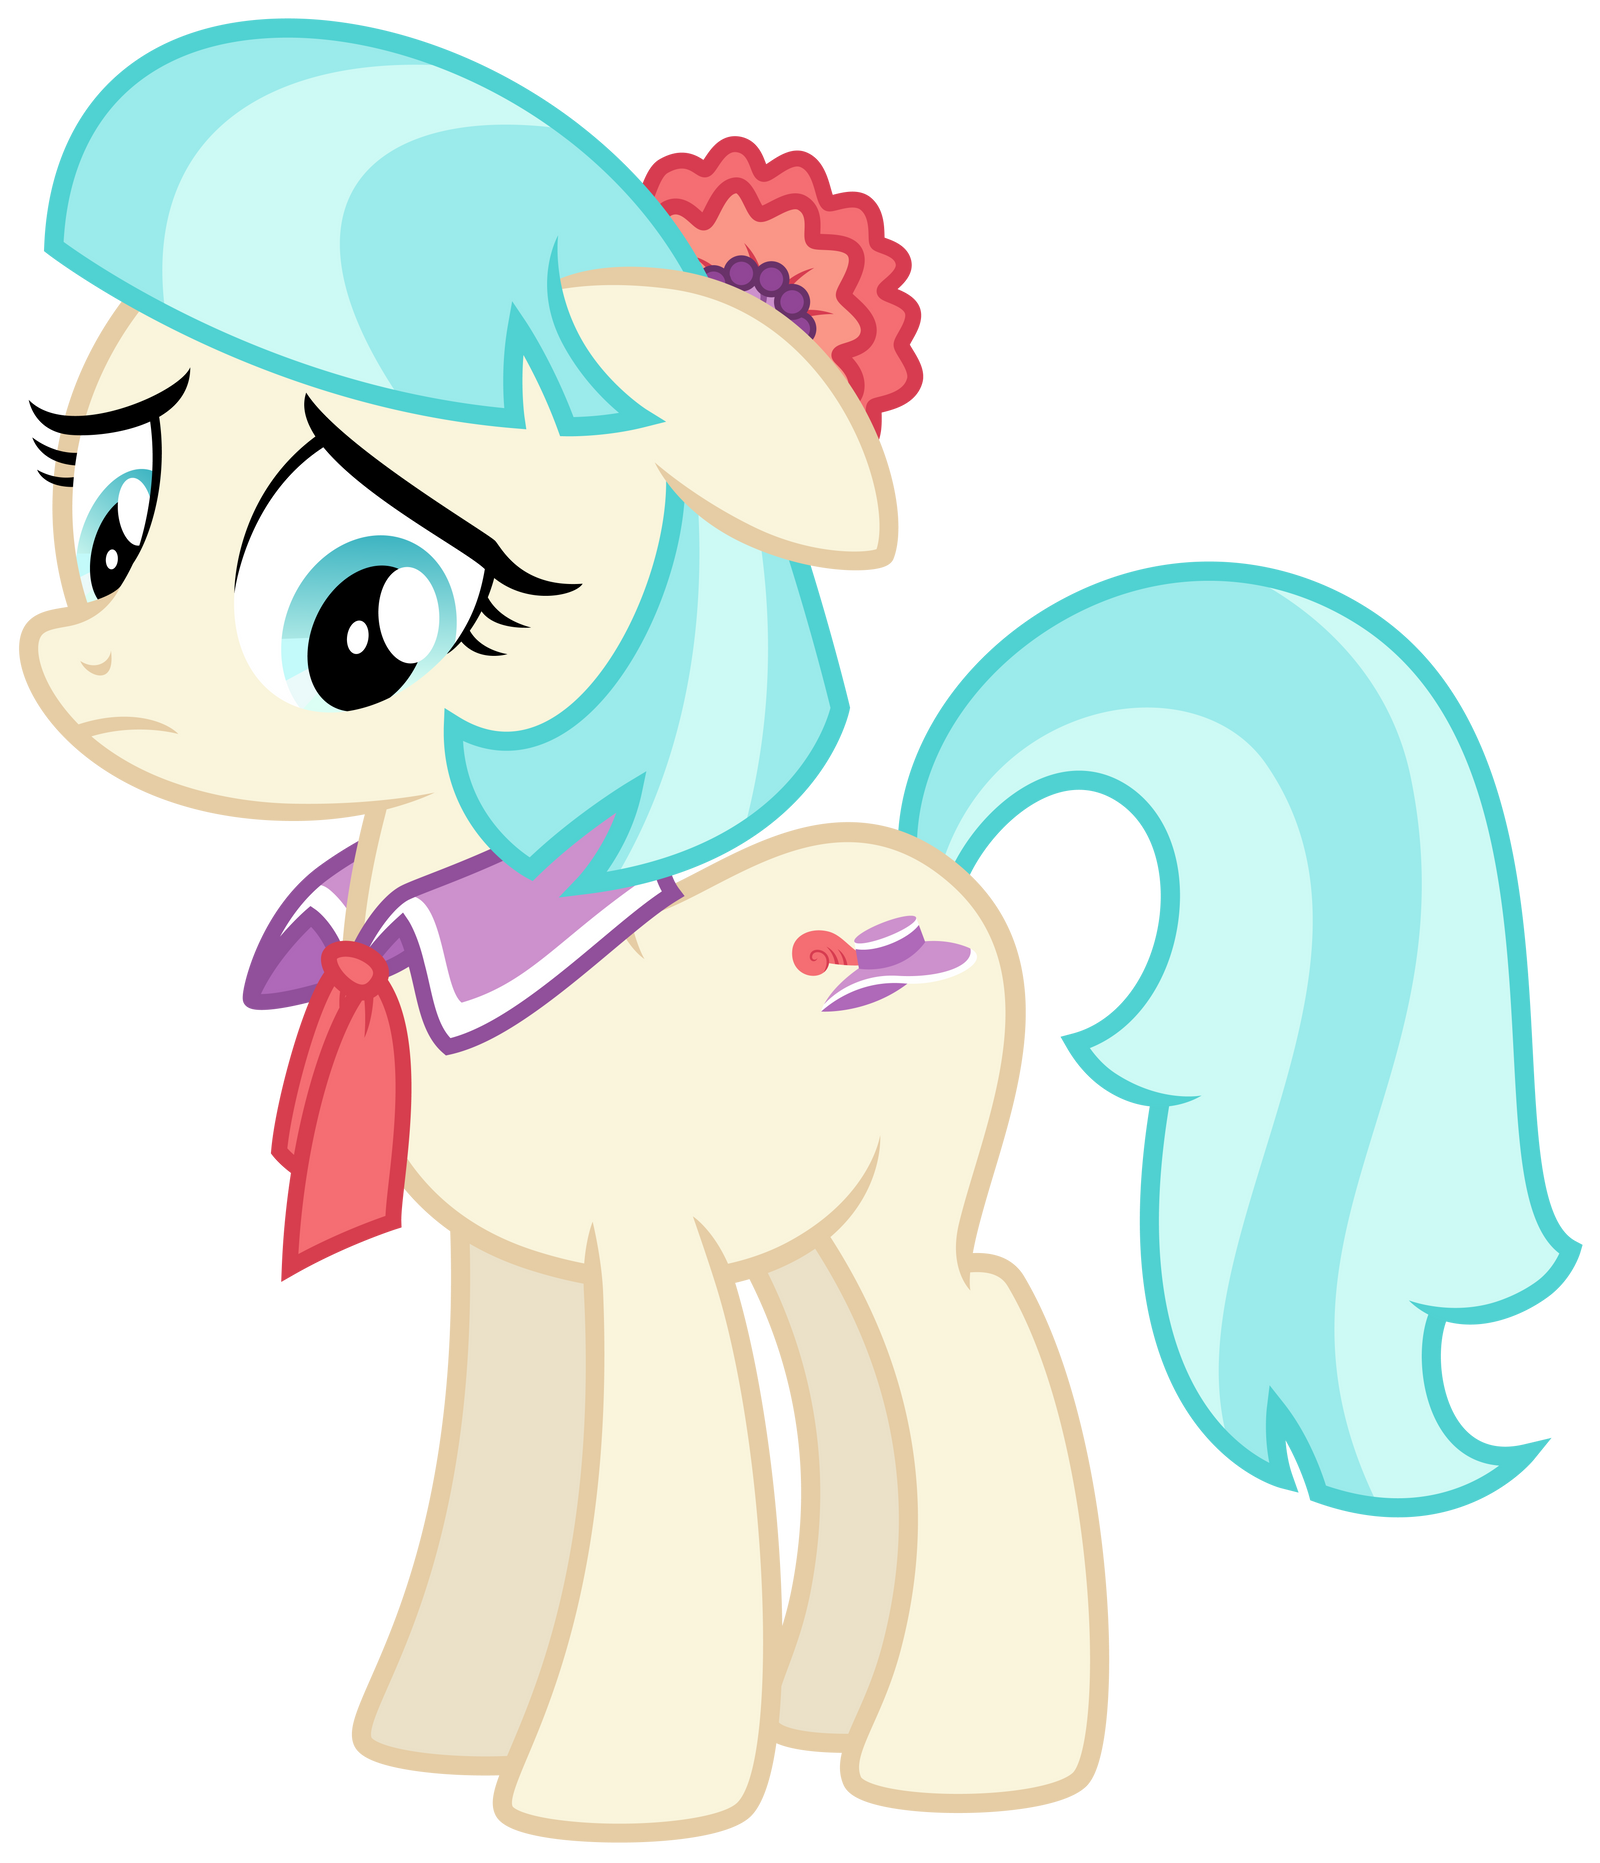 coco_pommel_is_sad____by_thatguy1945-d70vc0w.png